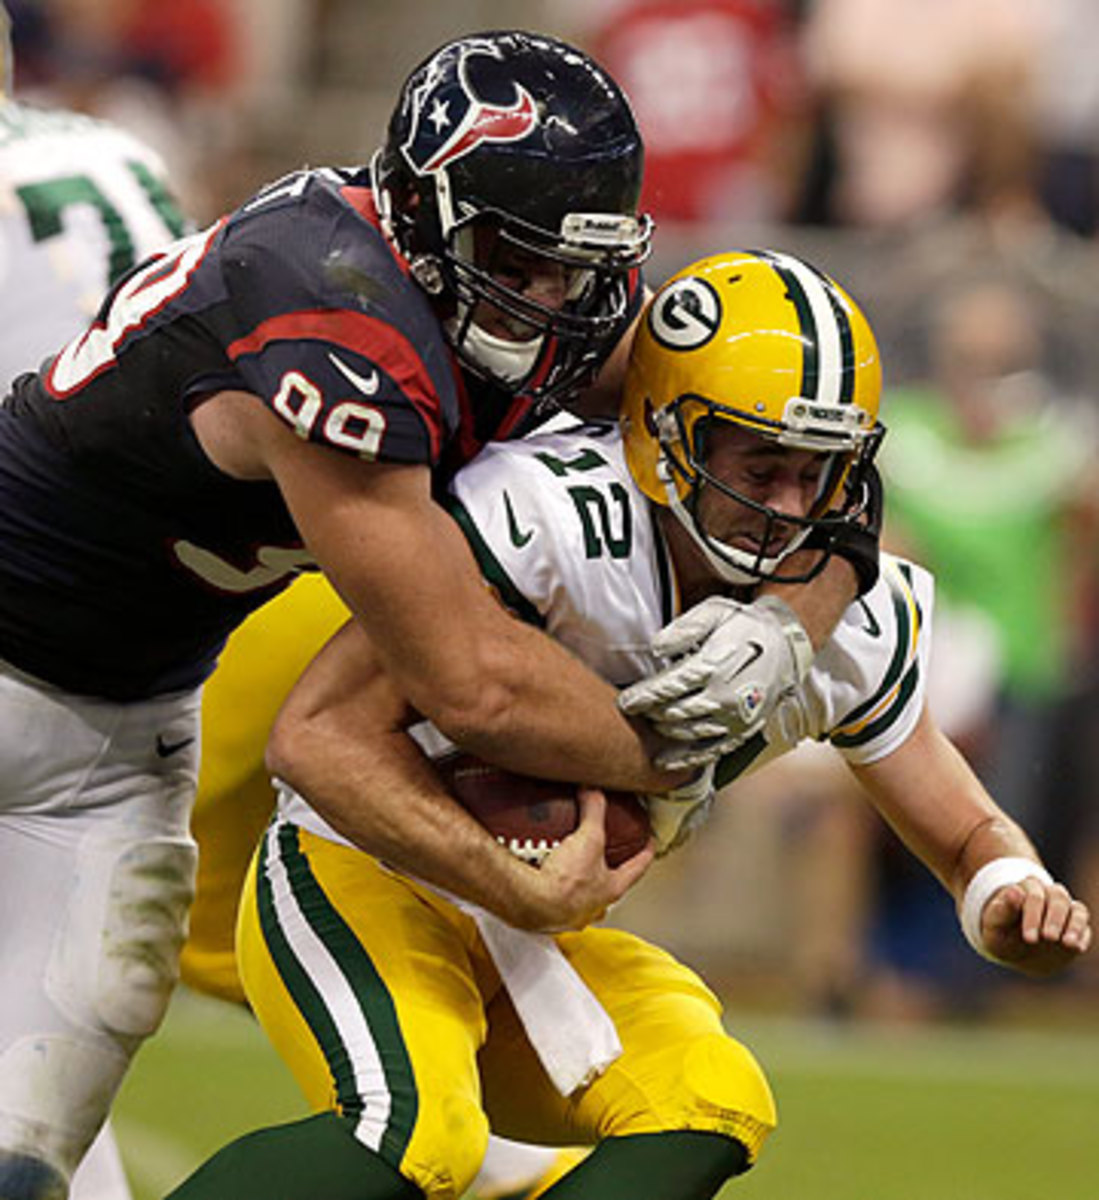 The MVP race is expected to come down to J.J. Watt and Aaron Rodgers, shown here in 2012. (Scott Halleran/Getty Images)